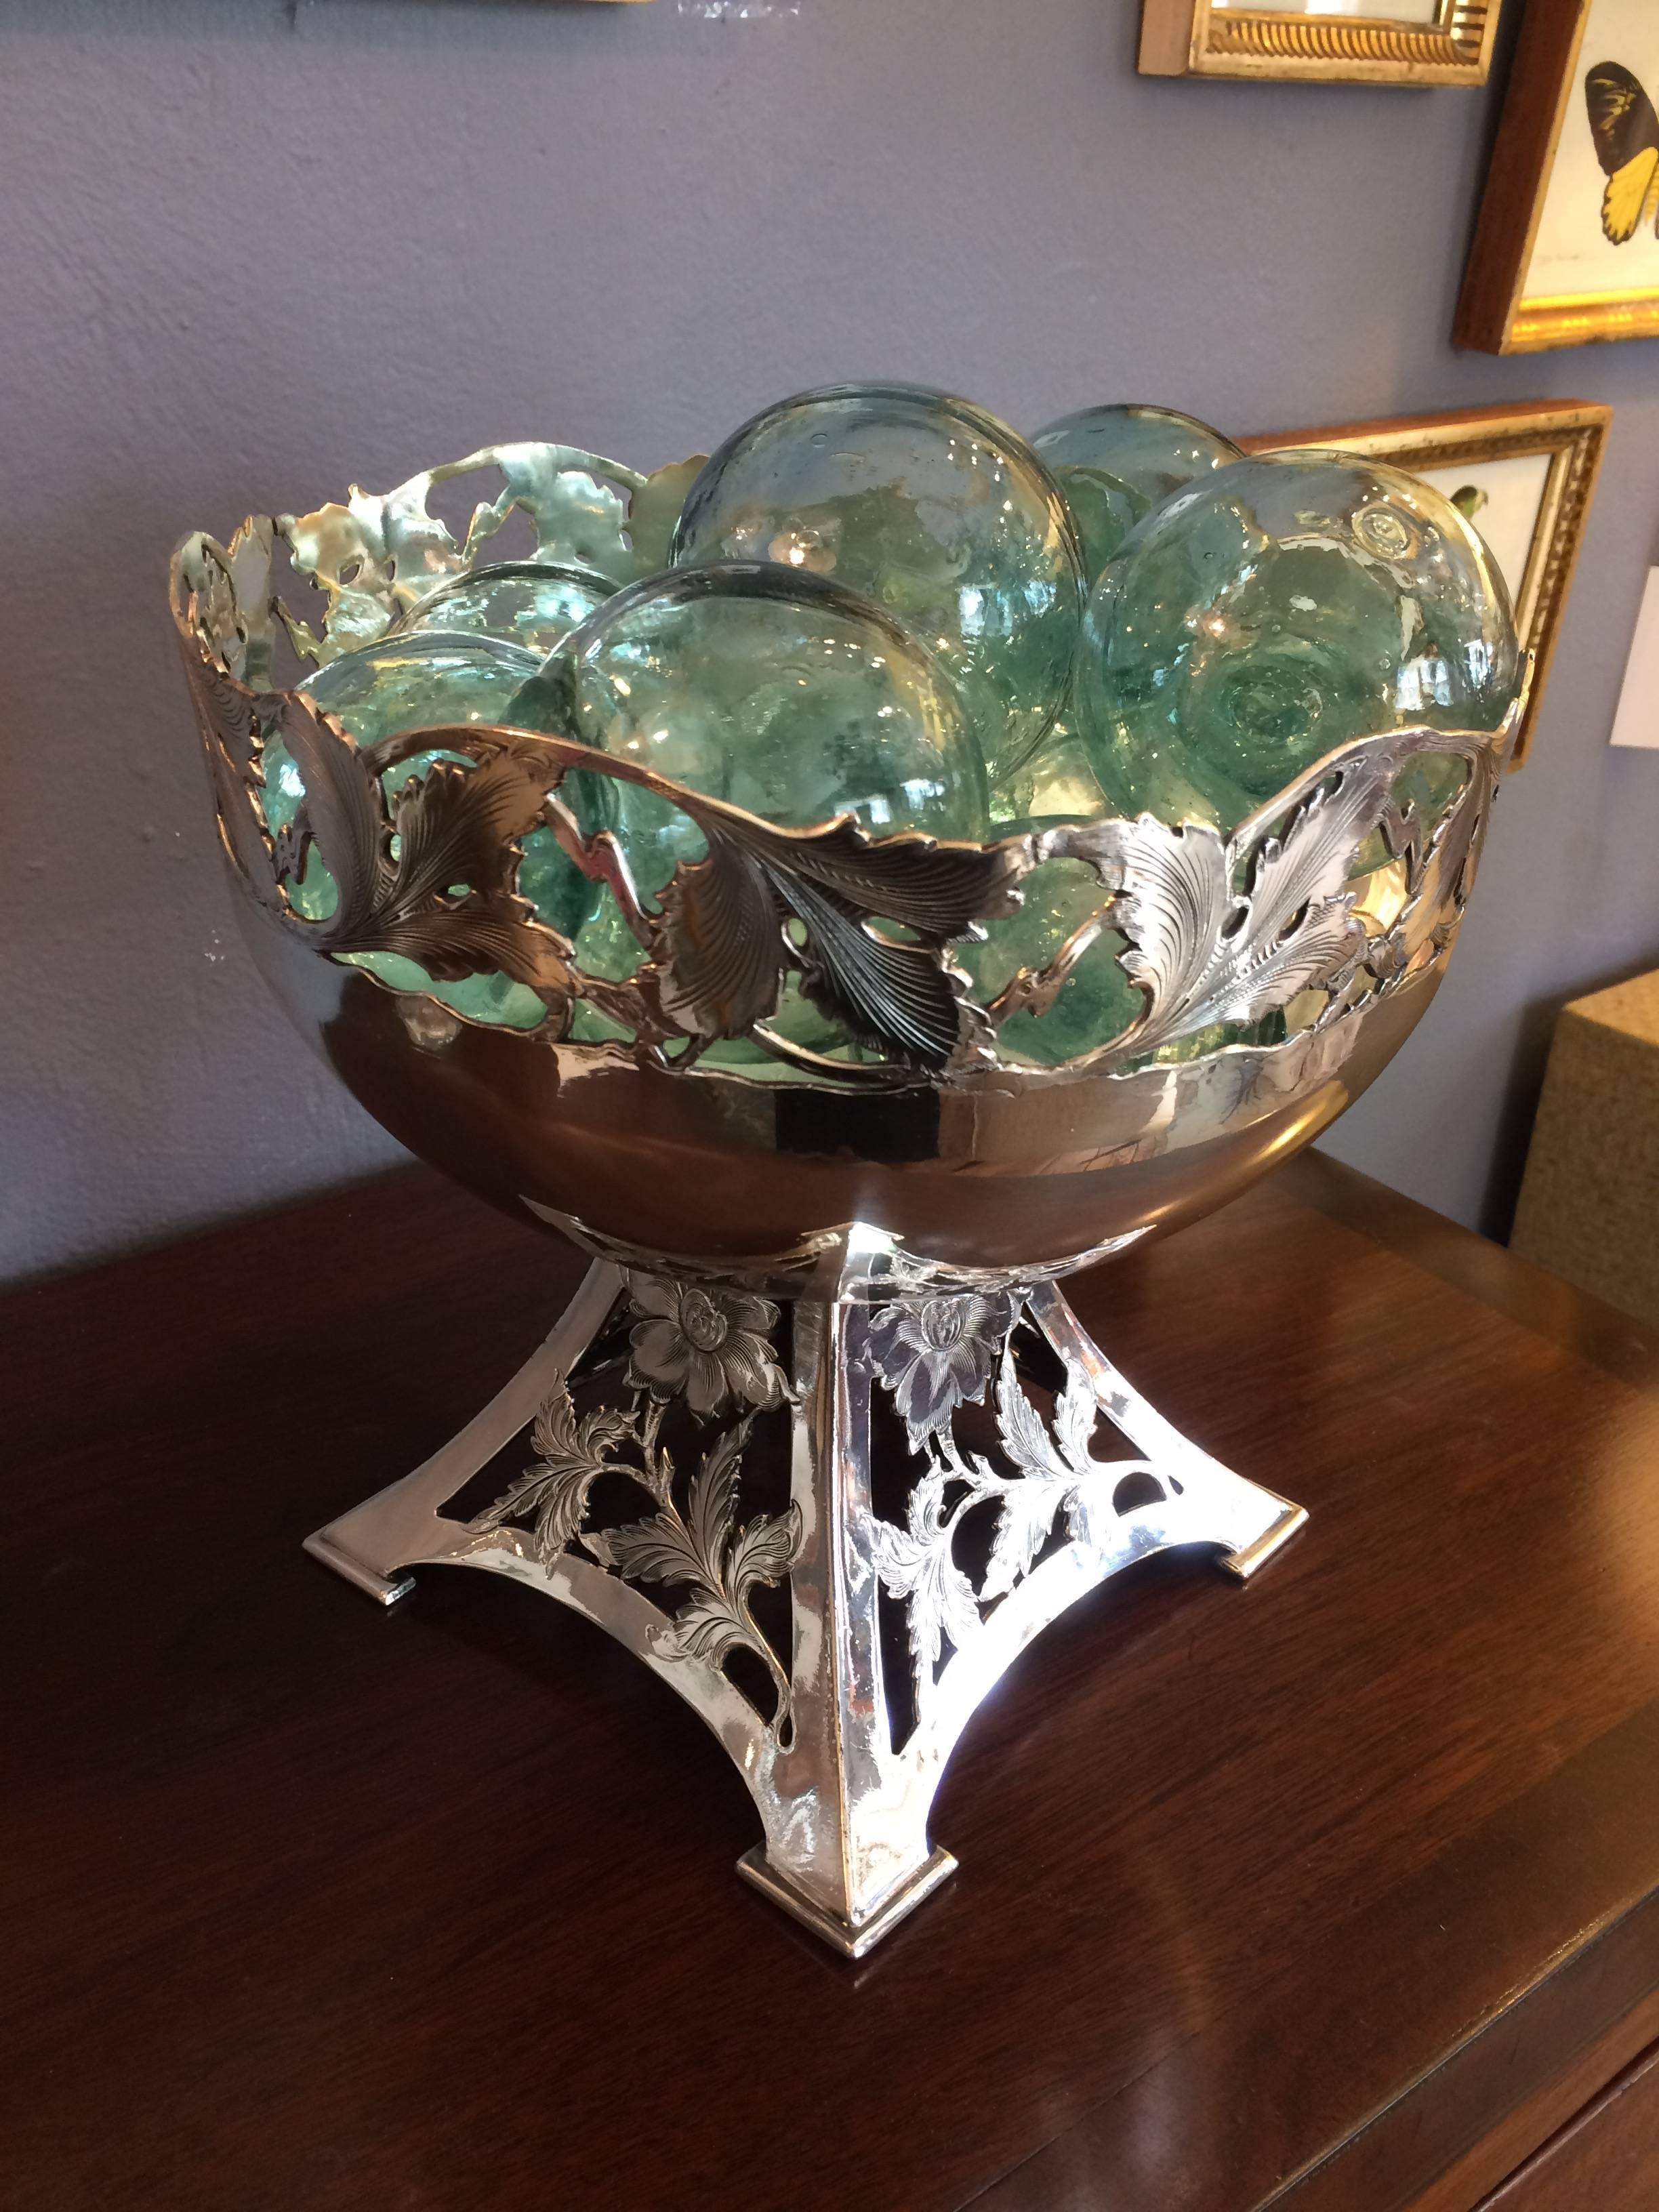 Lovely decorative silver plate compote with beautiful workmanship. It's been lacquered so won't tarnish. Pretty collection of light aqua glass floaters are included.